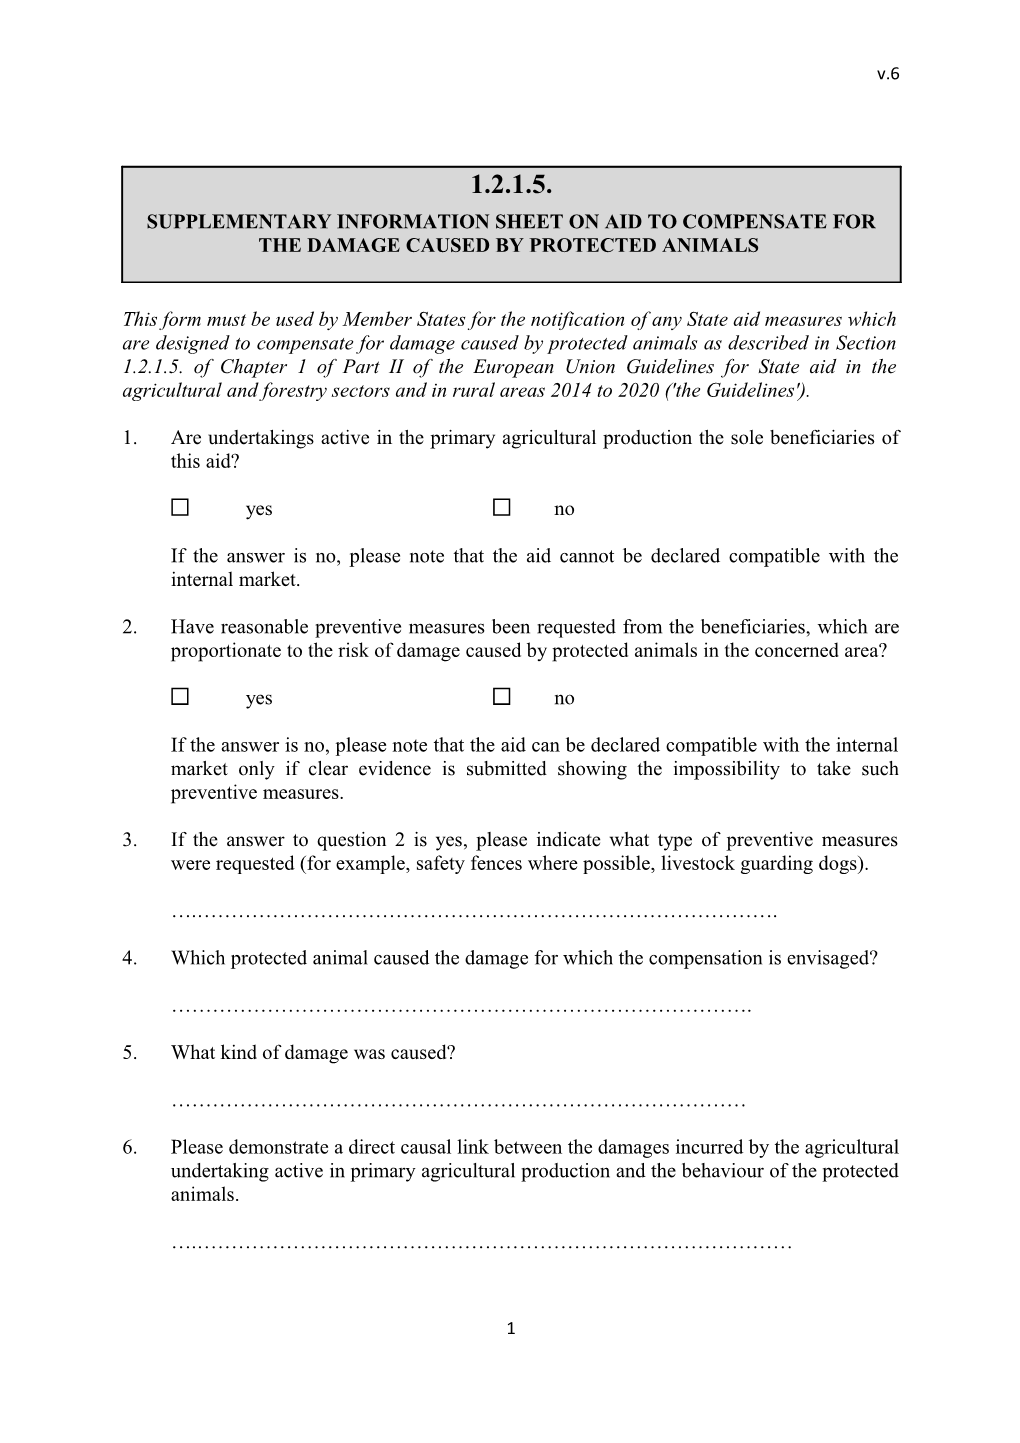 This Form Must Be Used by Member States for the Notification of Any State Aid Measures